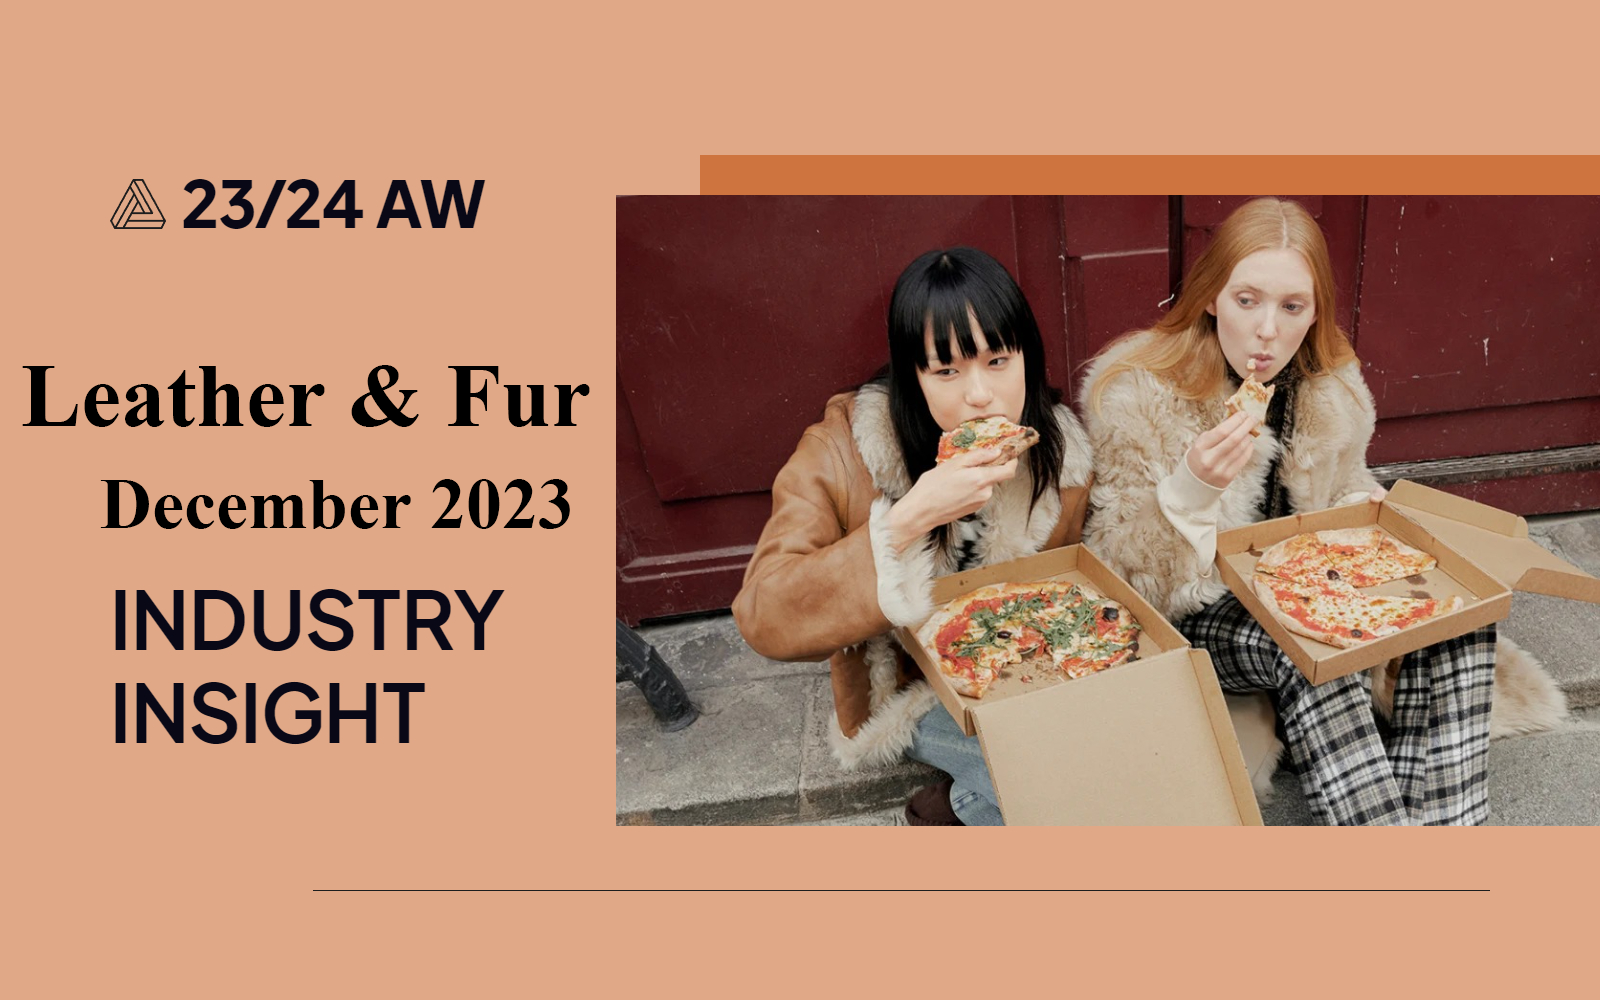 December 2023 -- The Industry Insight of Leather & Fur